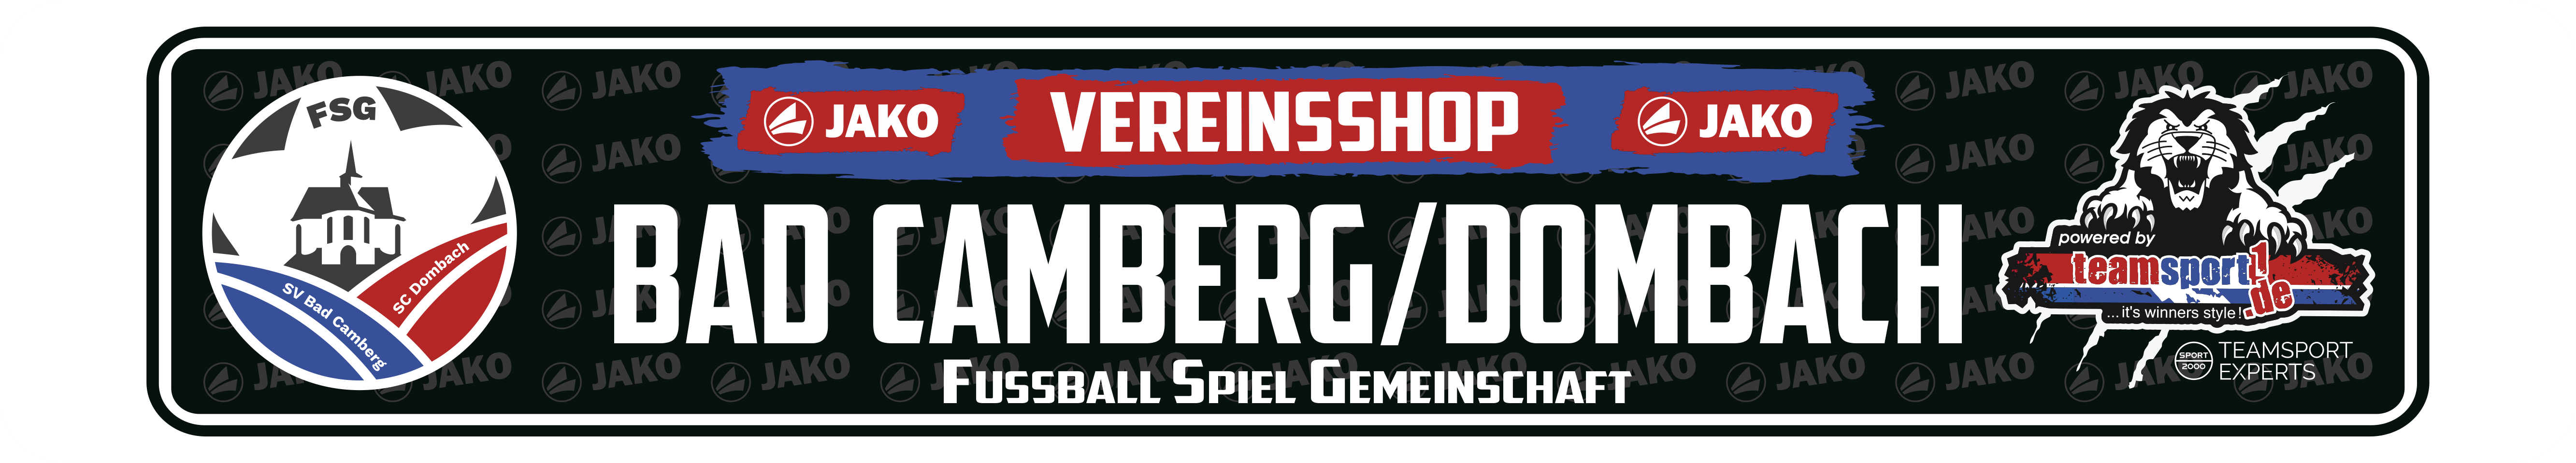 FSG Bad Camberg/Dombach Title Image